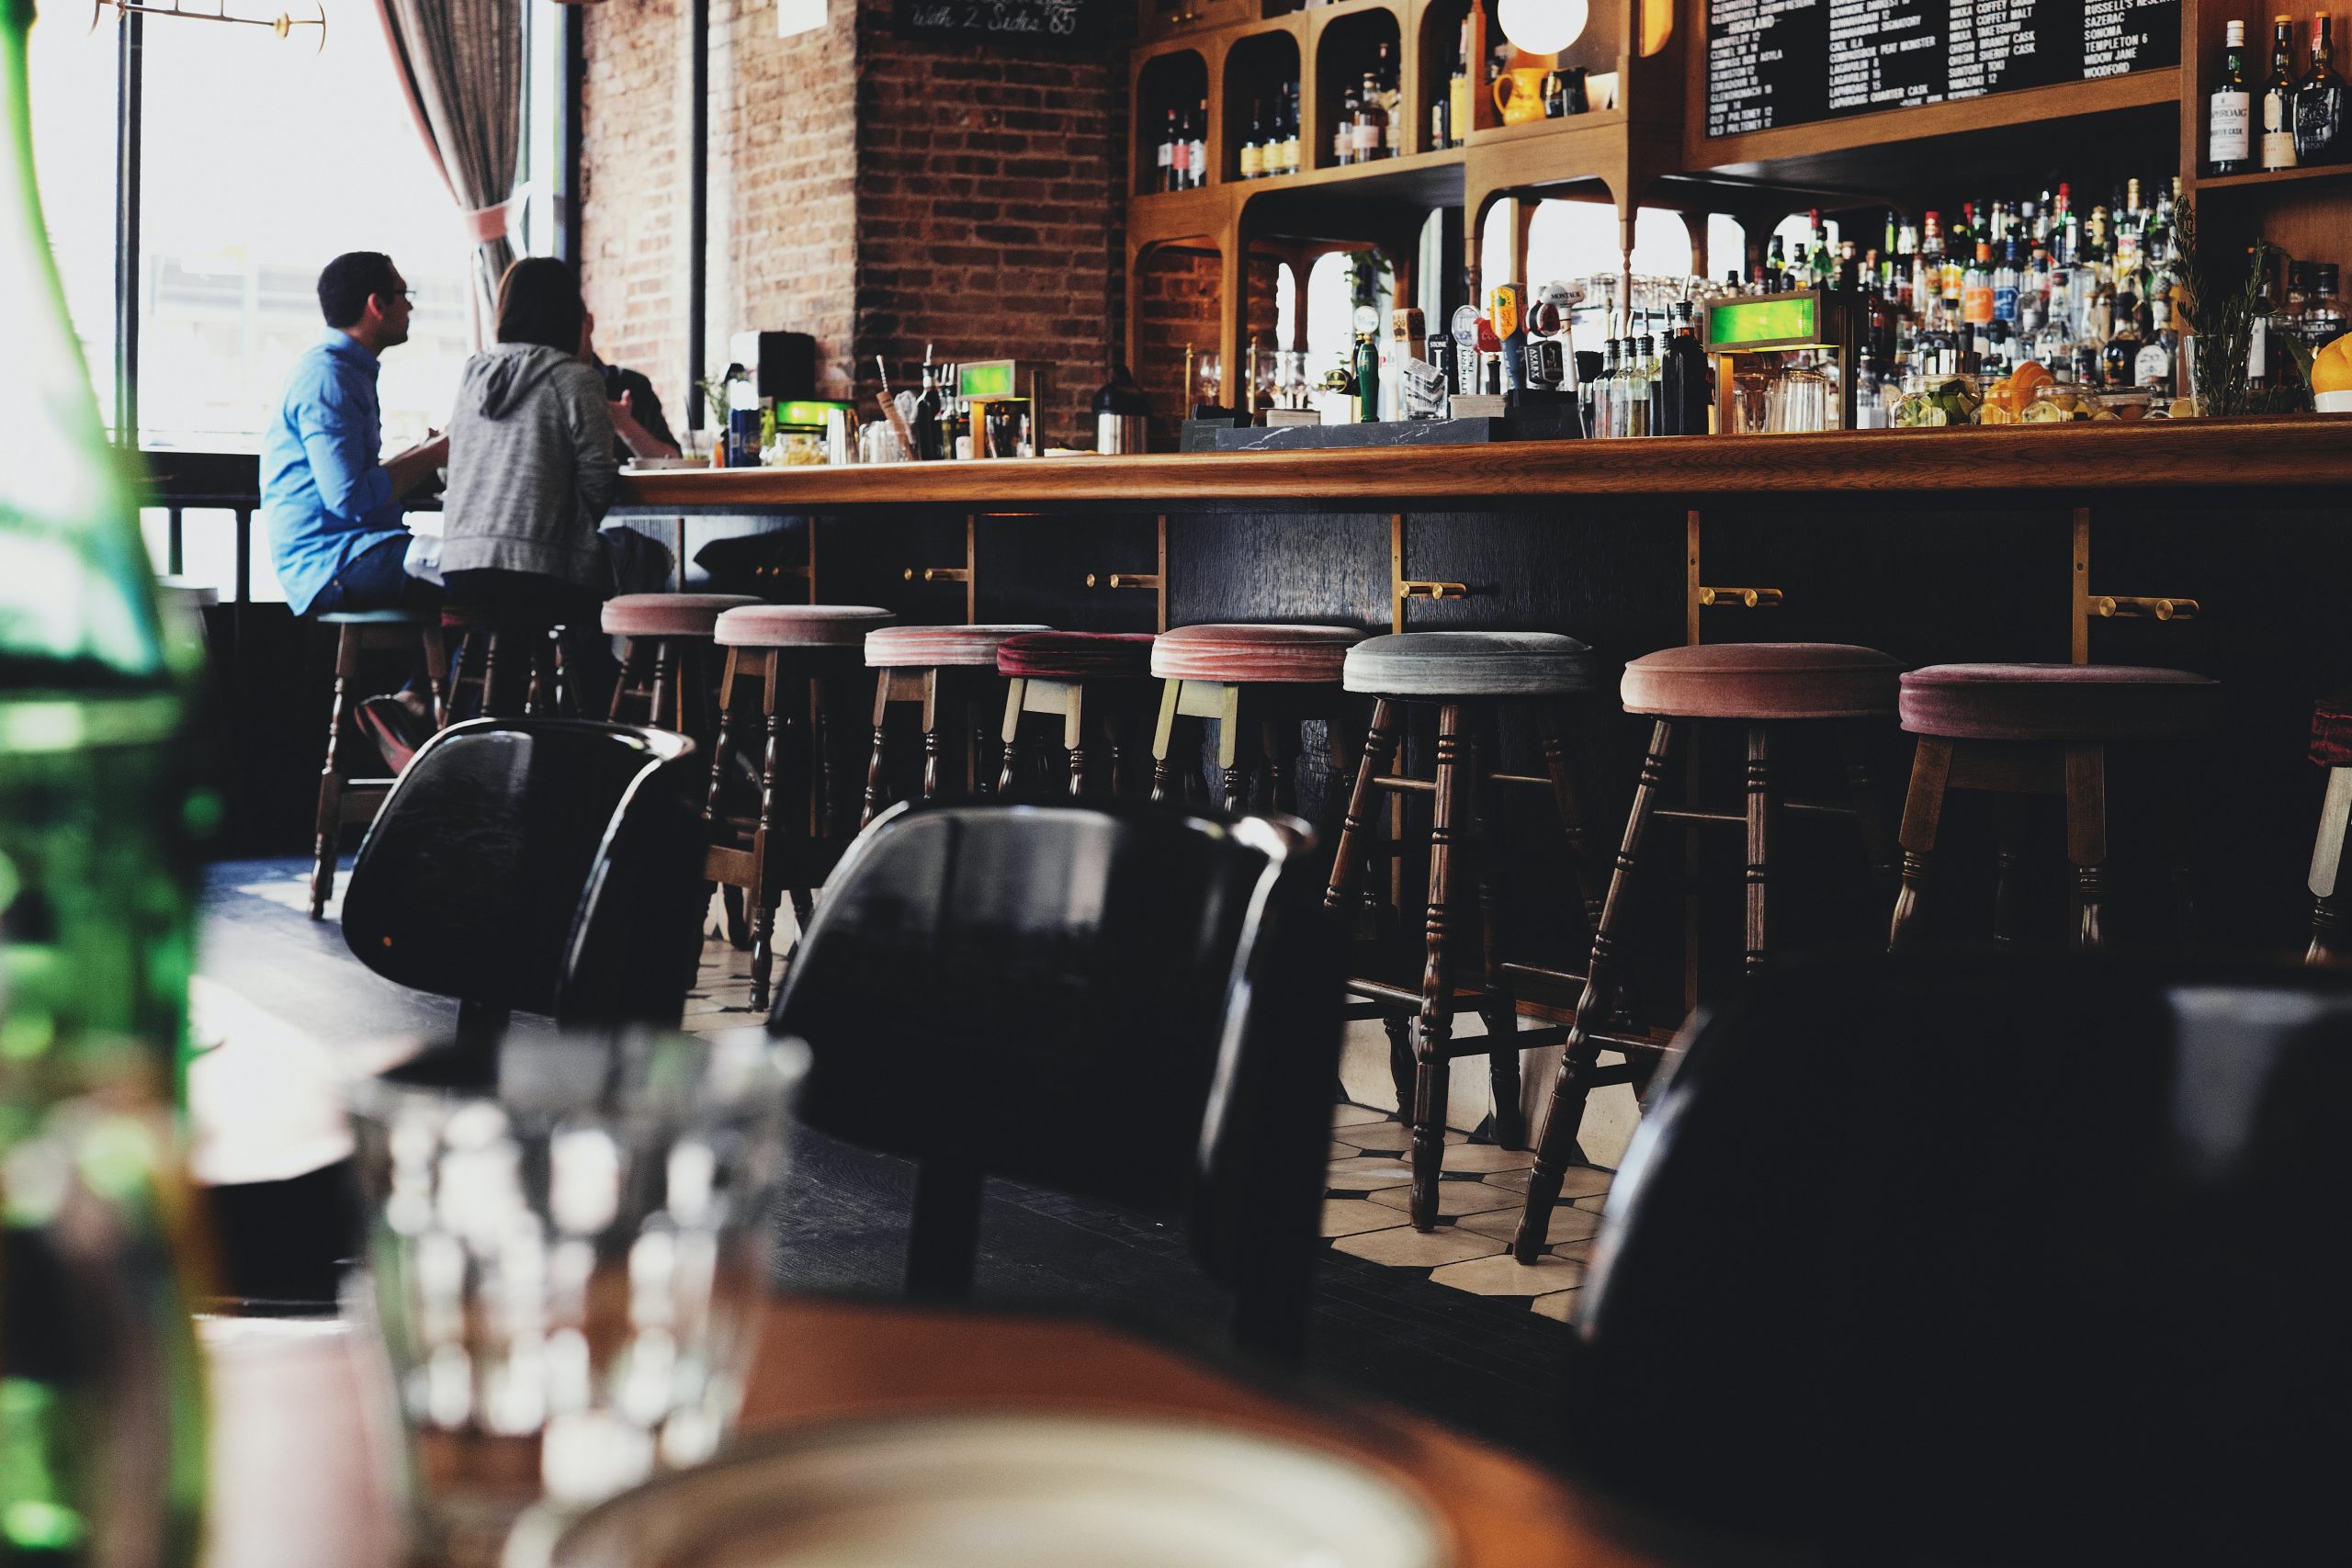 A Business Traveller’s Guide to the Top 6 Pubs for After-Work Drinks in Manchester City Centre